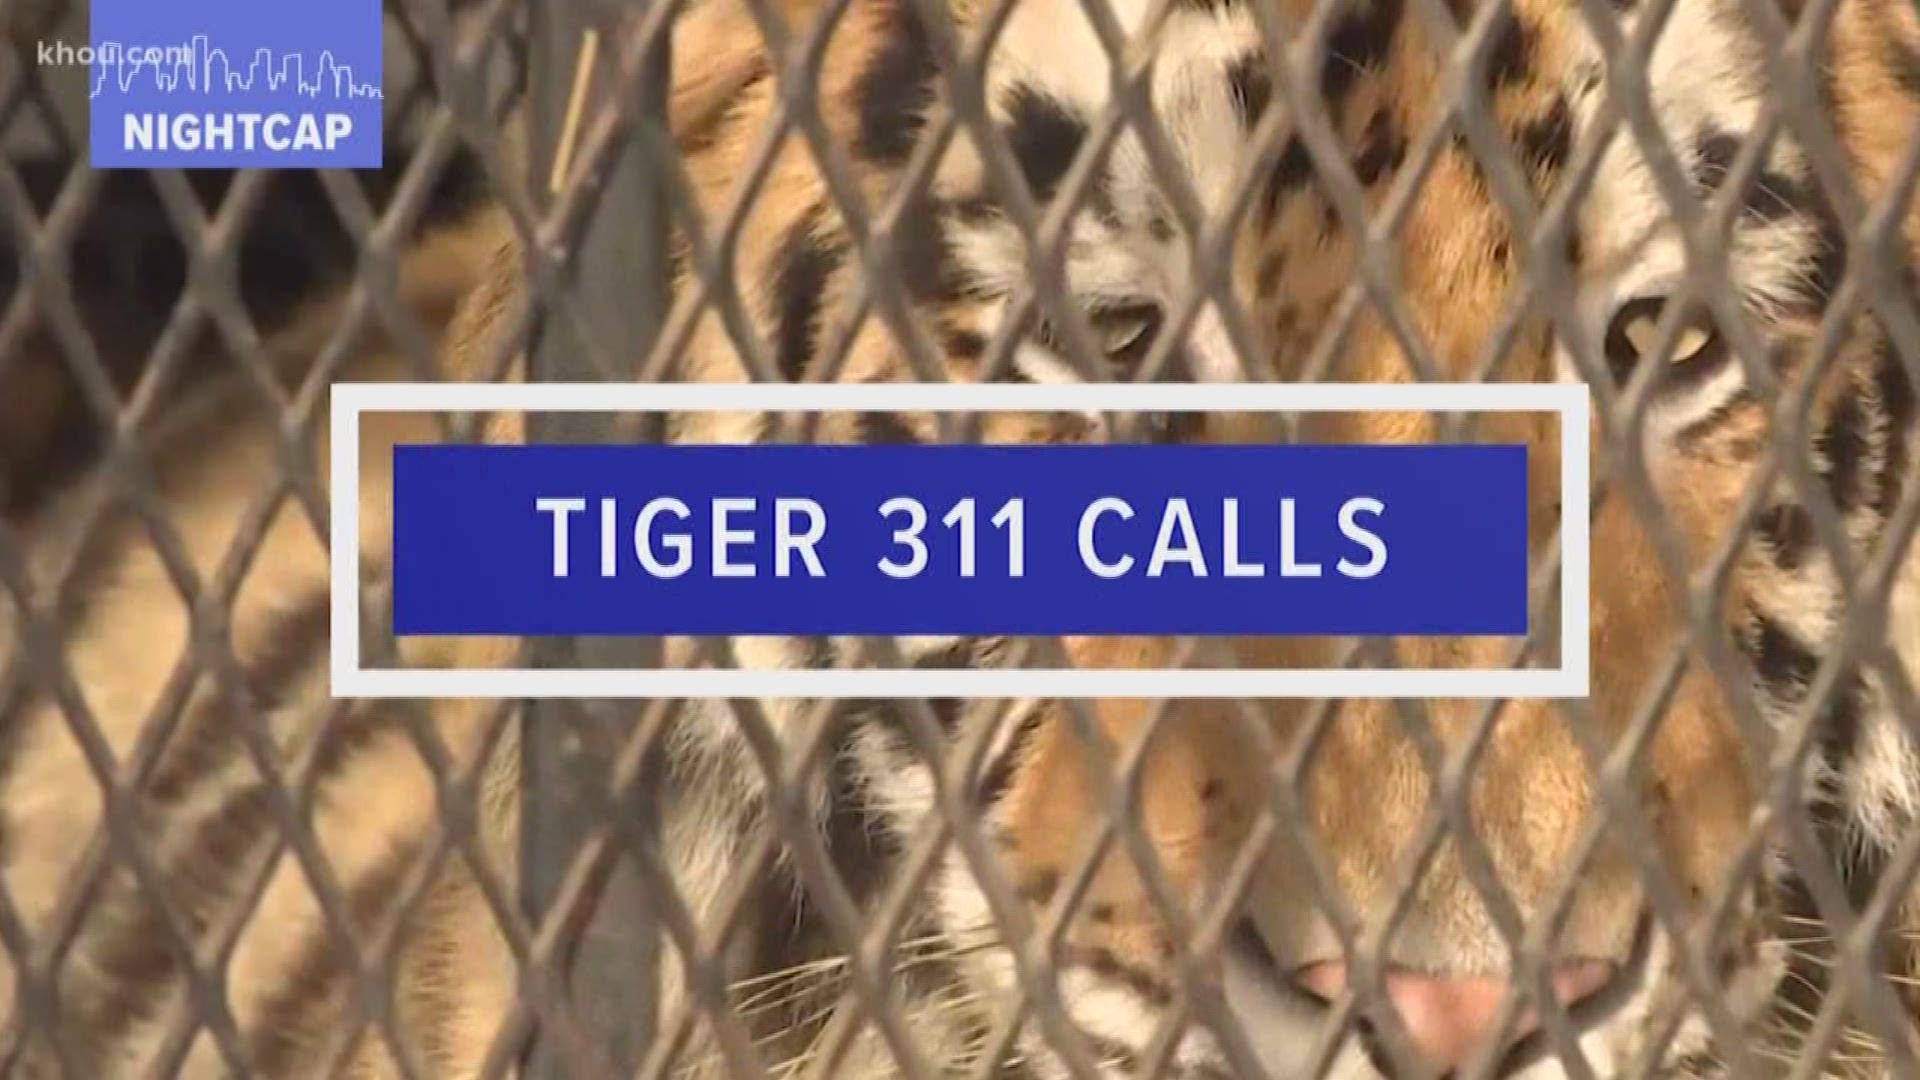 It's probably one of the strangest 311 calls we've ever heard. A teenager finds a tiger in an abandoned home and tells the operator, "I'm not lying, I swear." That story kicks off this edition of the 90-second nightcap.